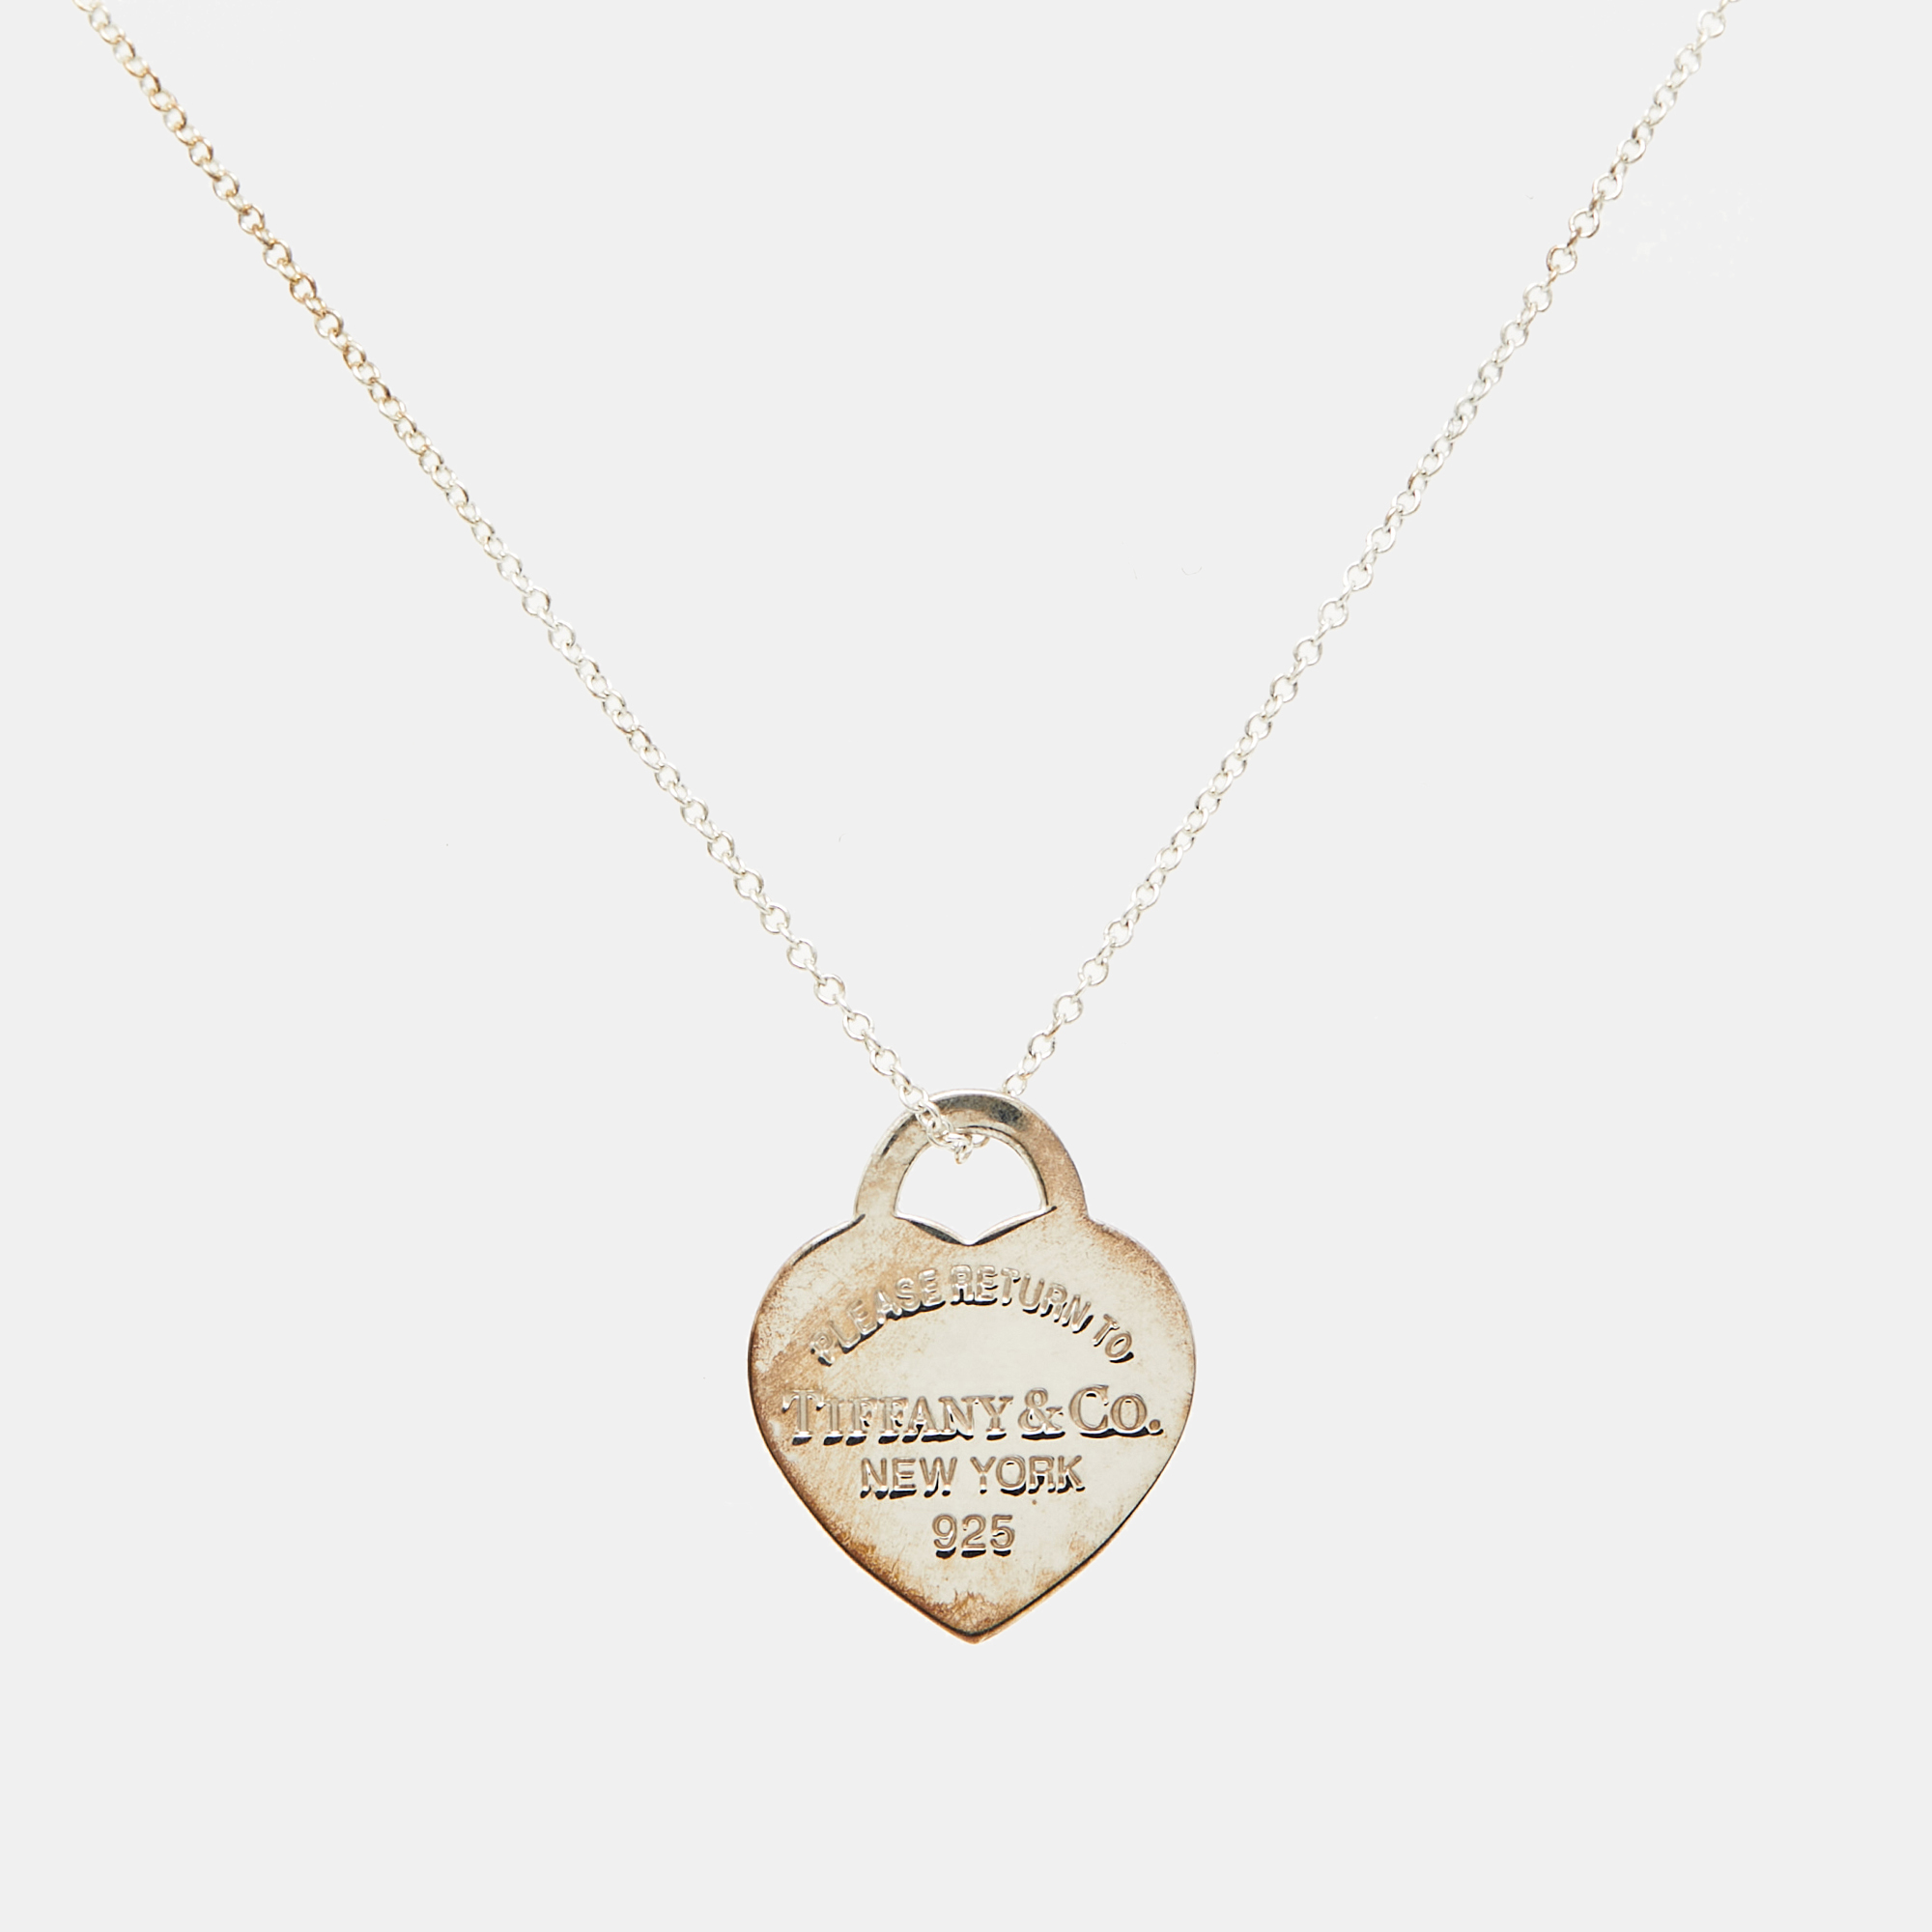 Tiffany & Co. Return To Tiffany Sterling Silver Pendant Necklace